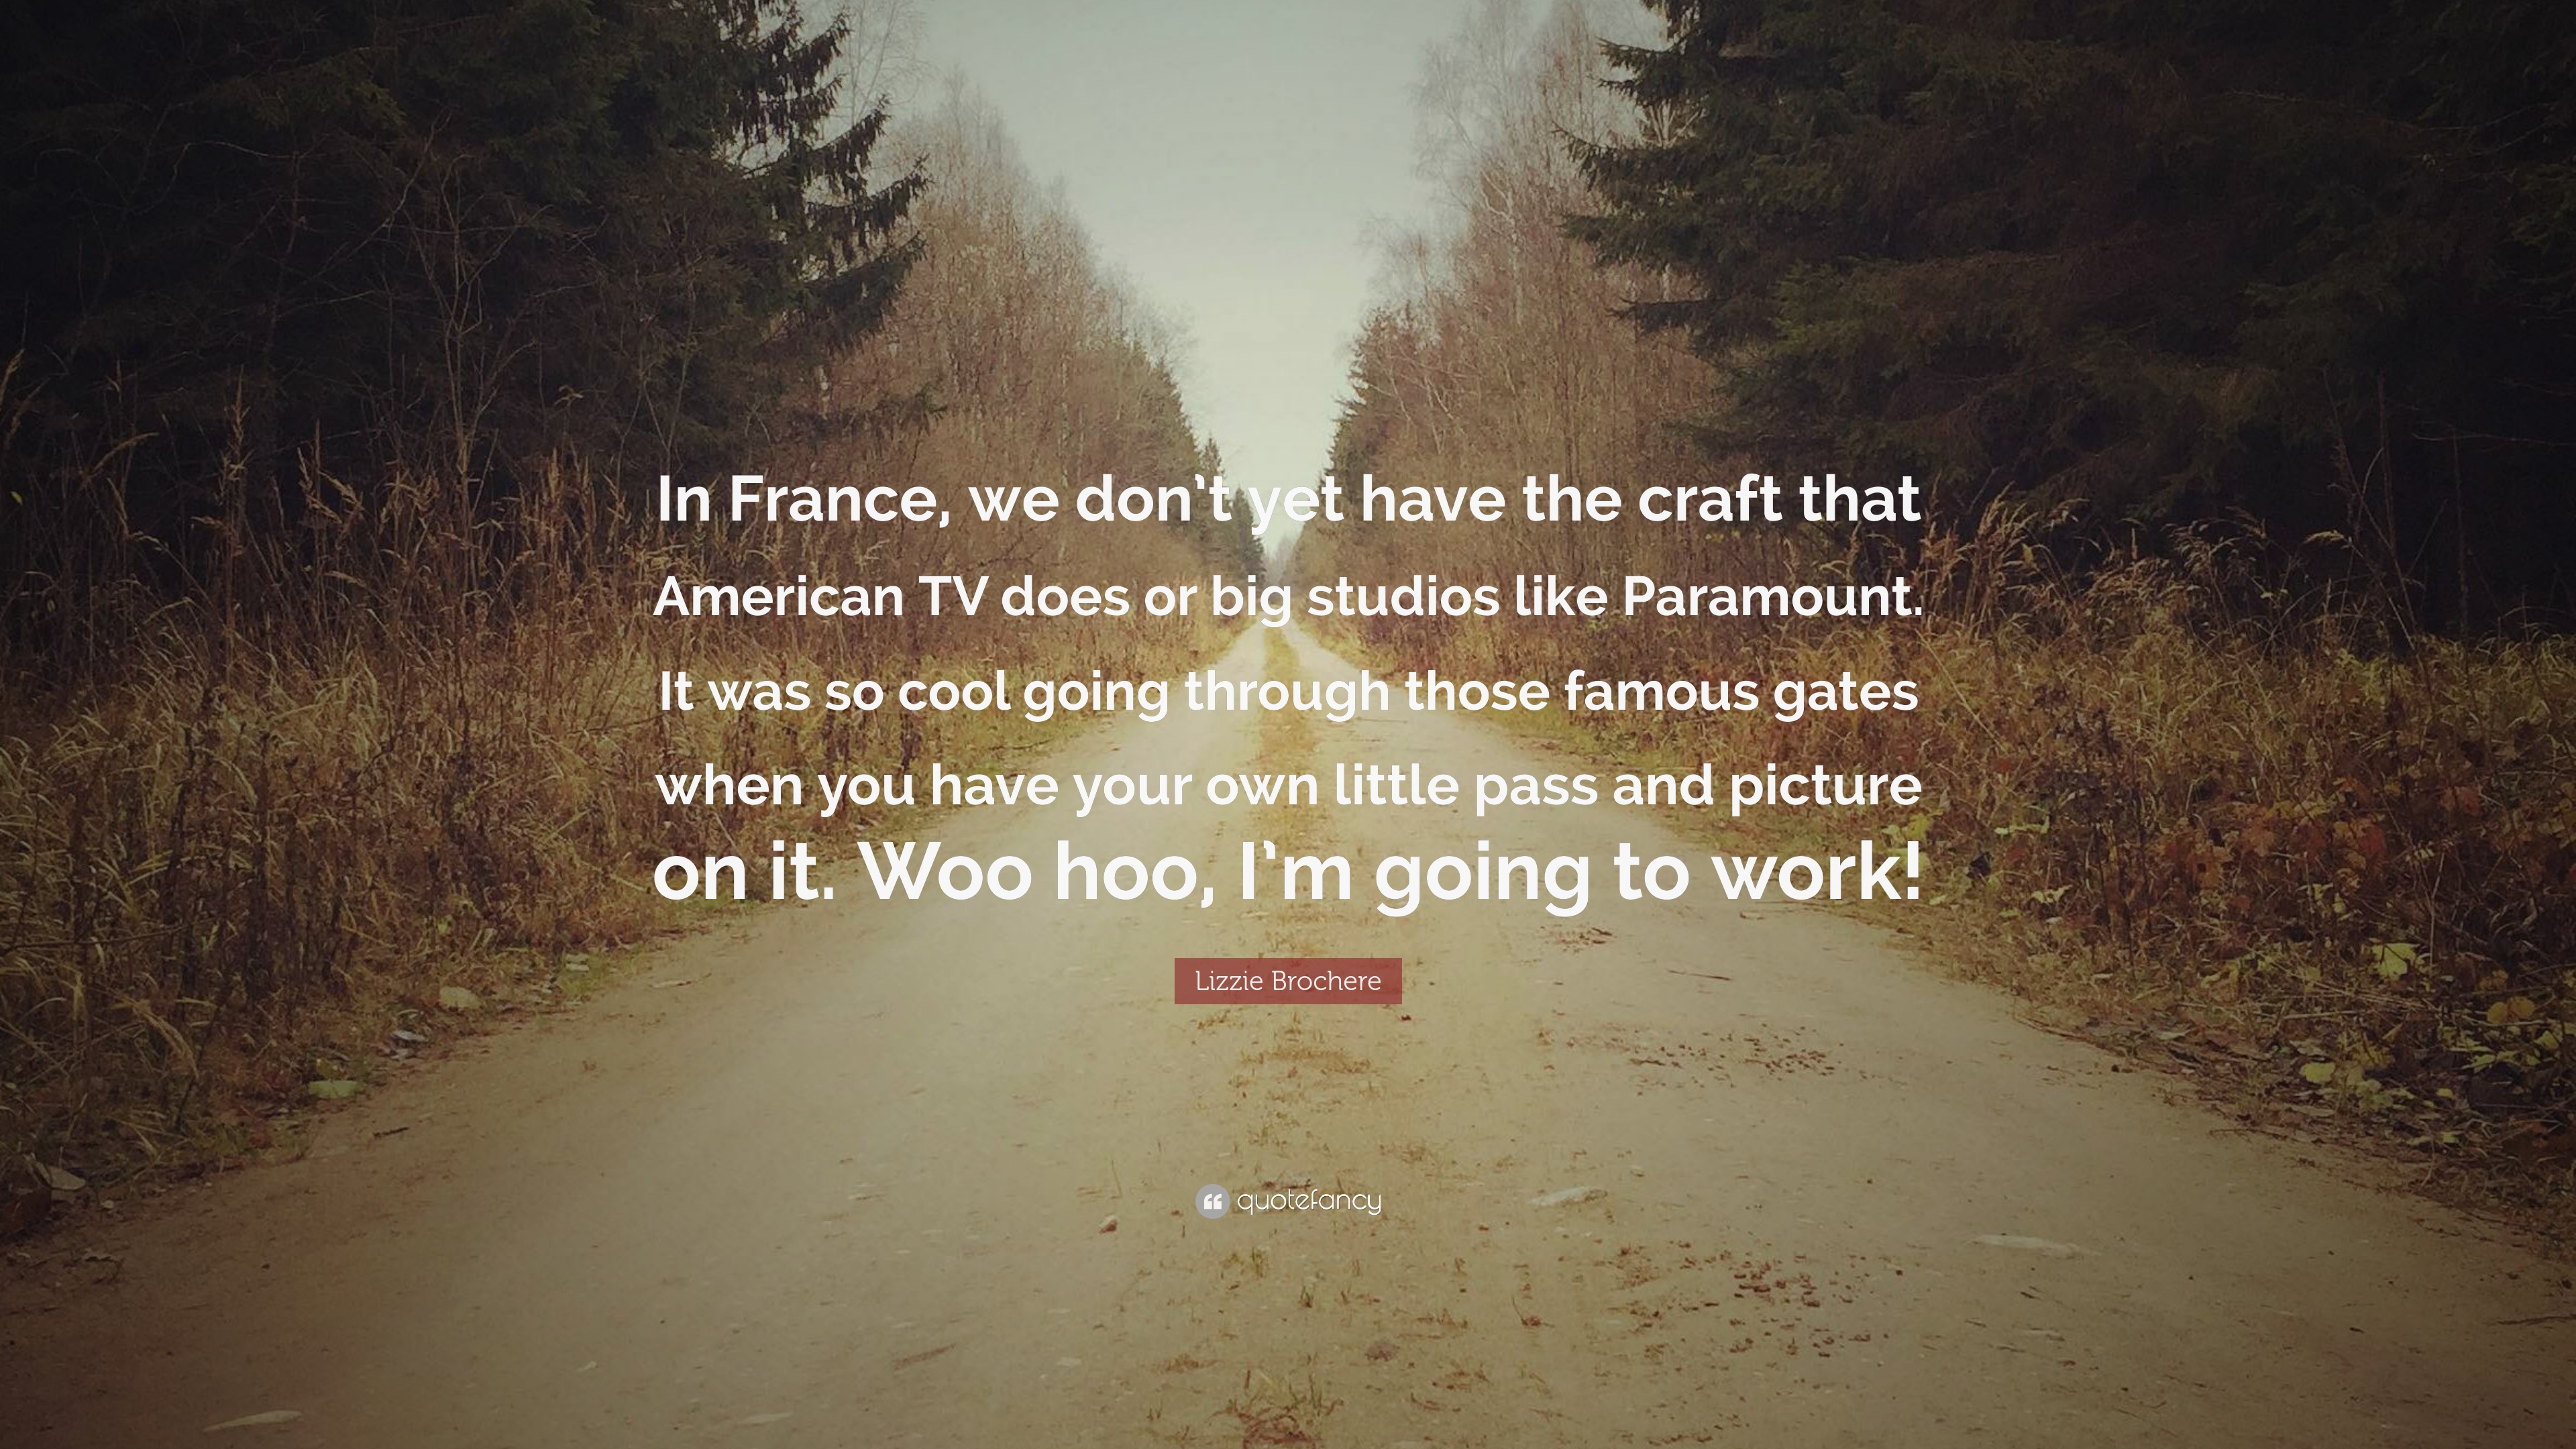 Lizzie Brochere Quote: “In France, we don't yet have the craft that